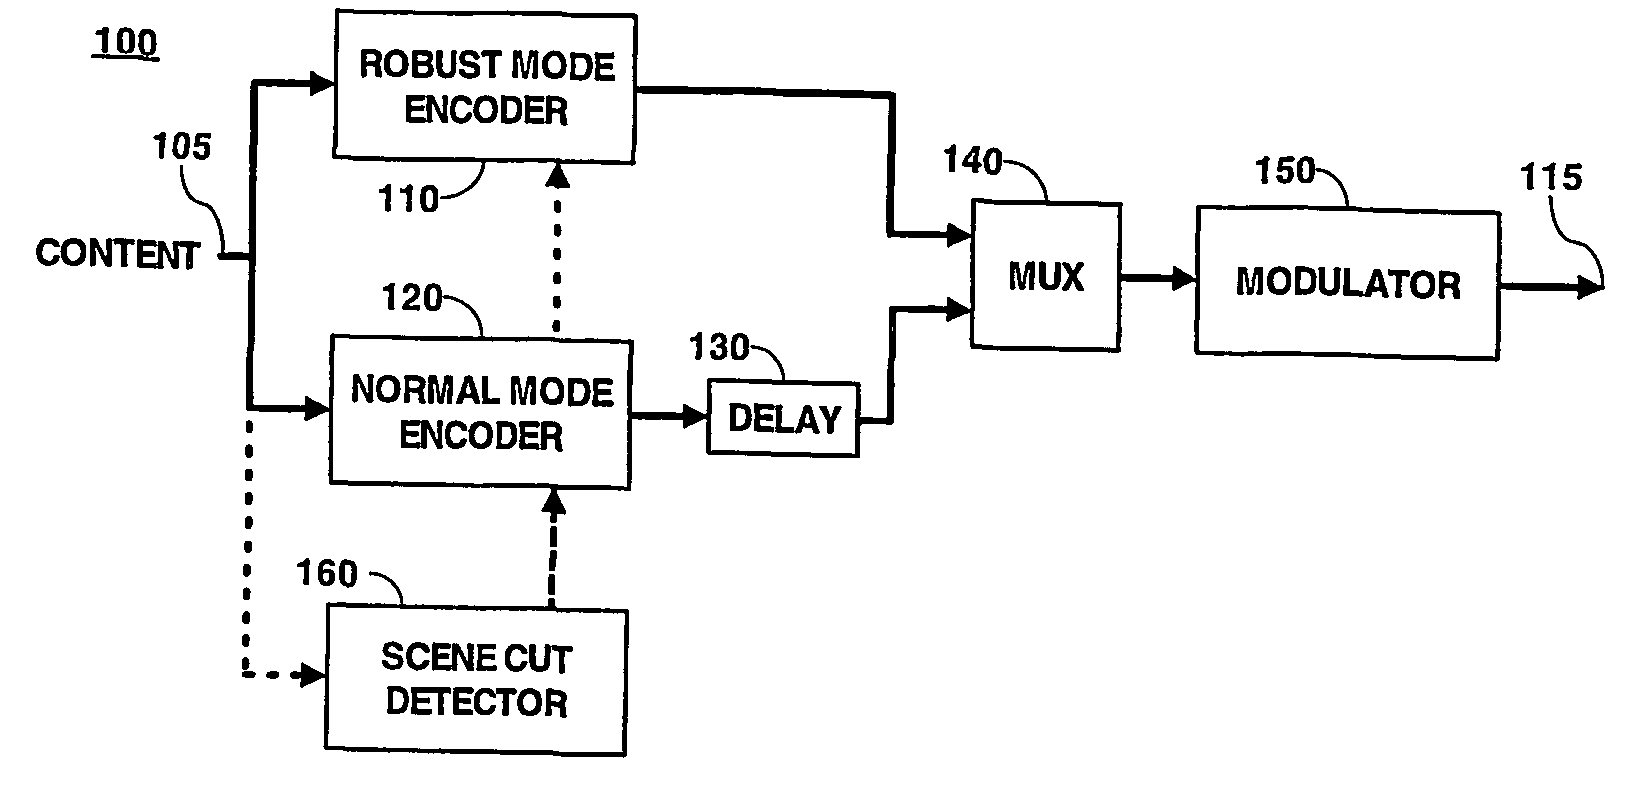 Robust mode staggercasting with adjustable delay offset